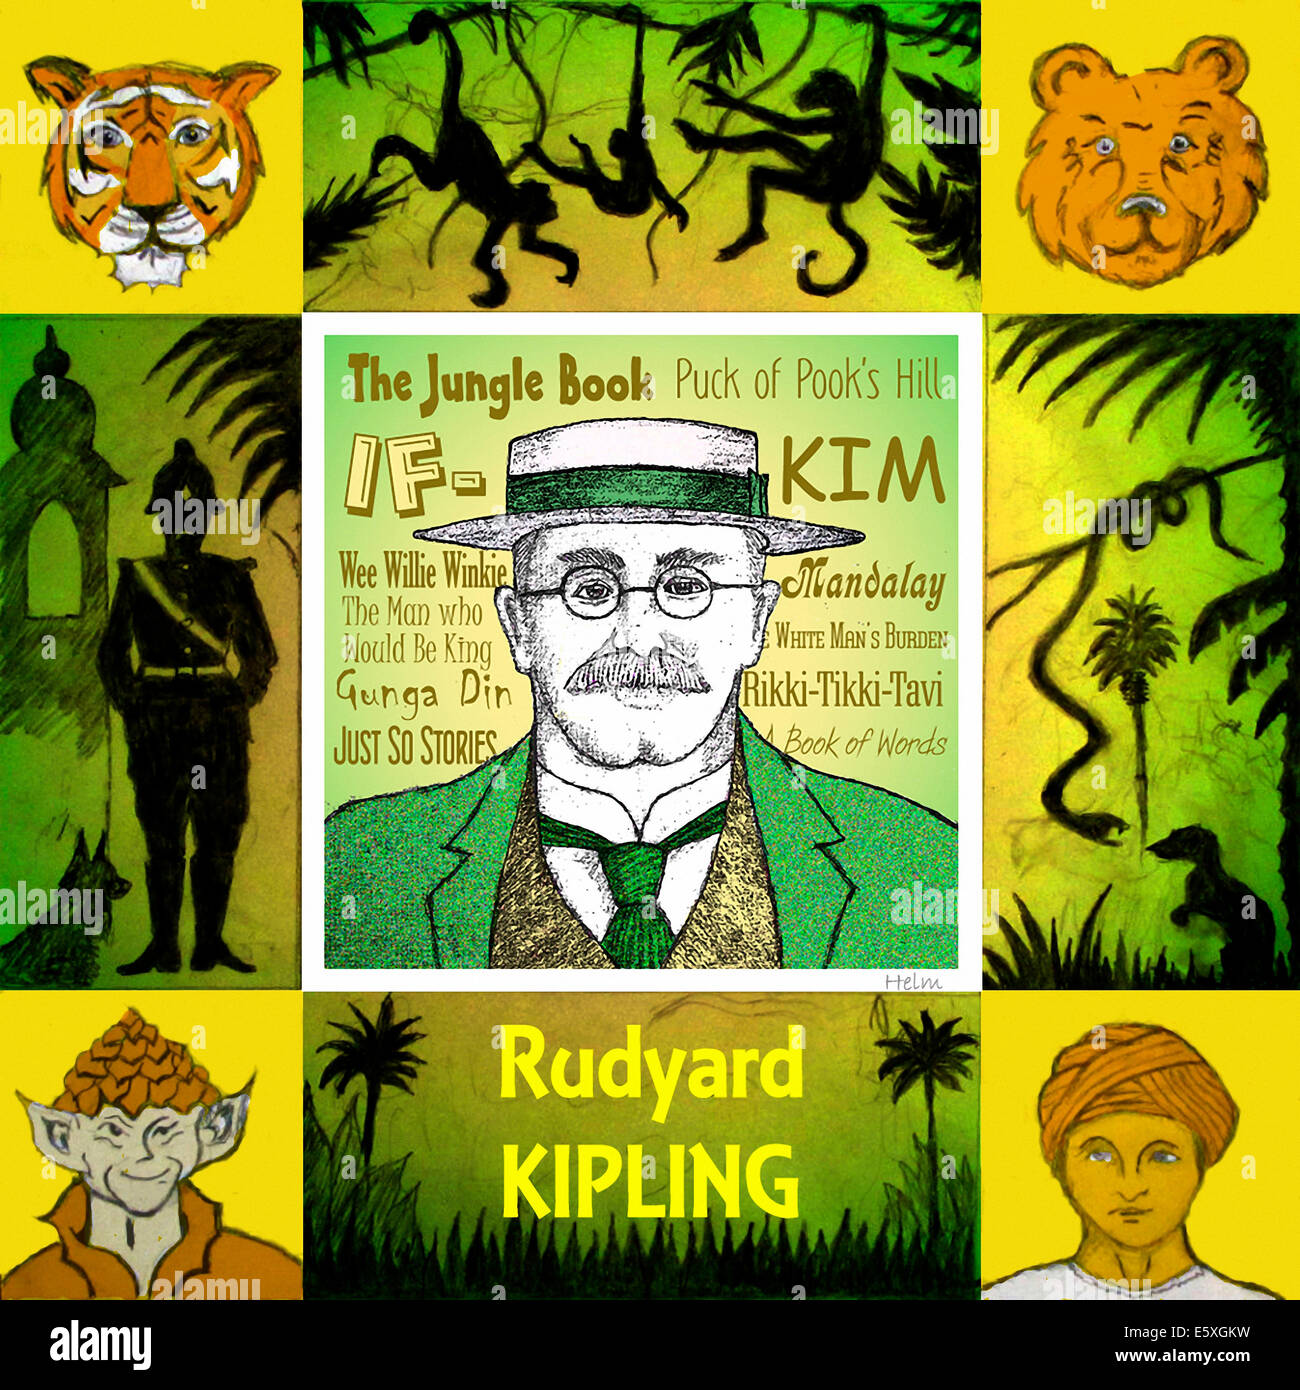 Rudyard Kipling Portrait High Resolution Stock Photography and Images -  Alamy